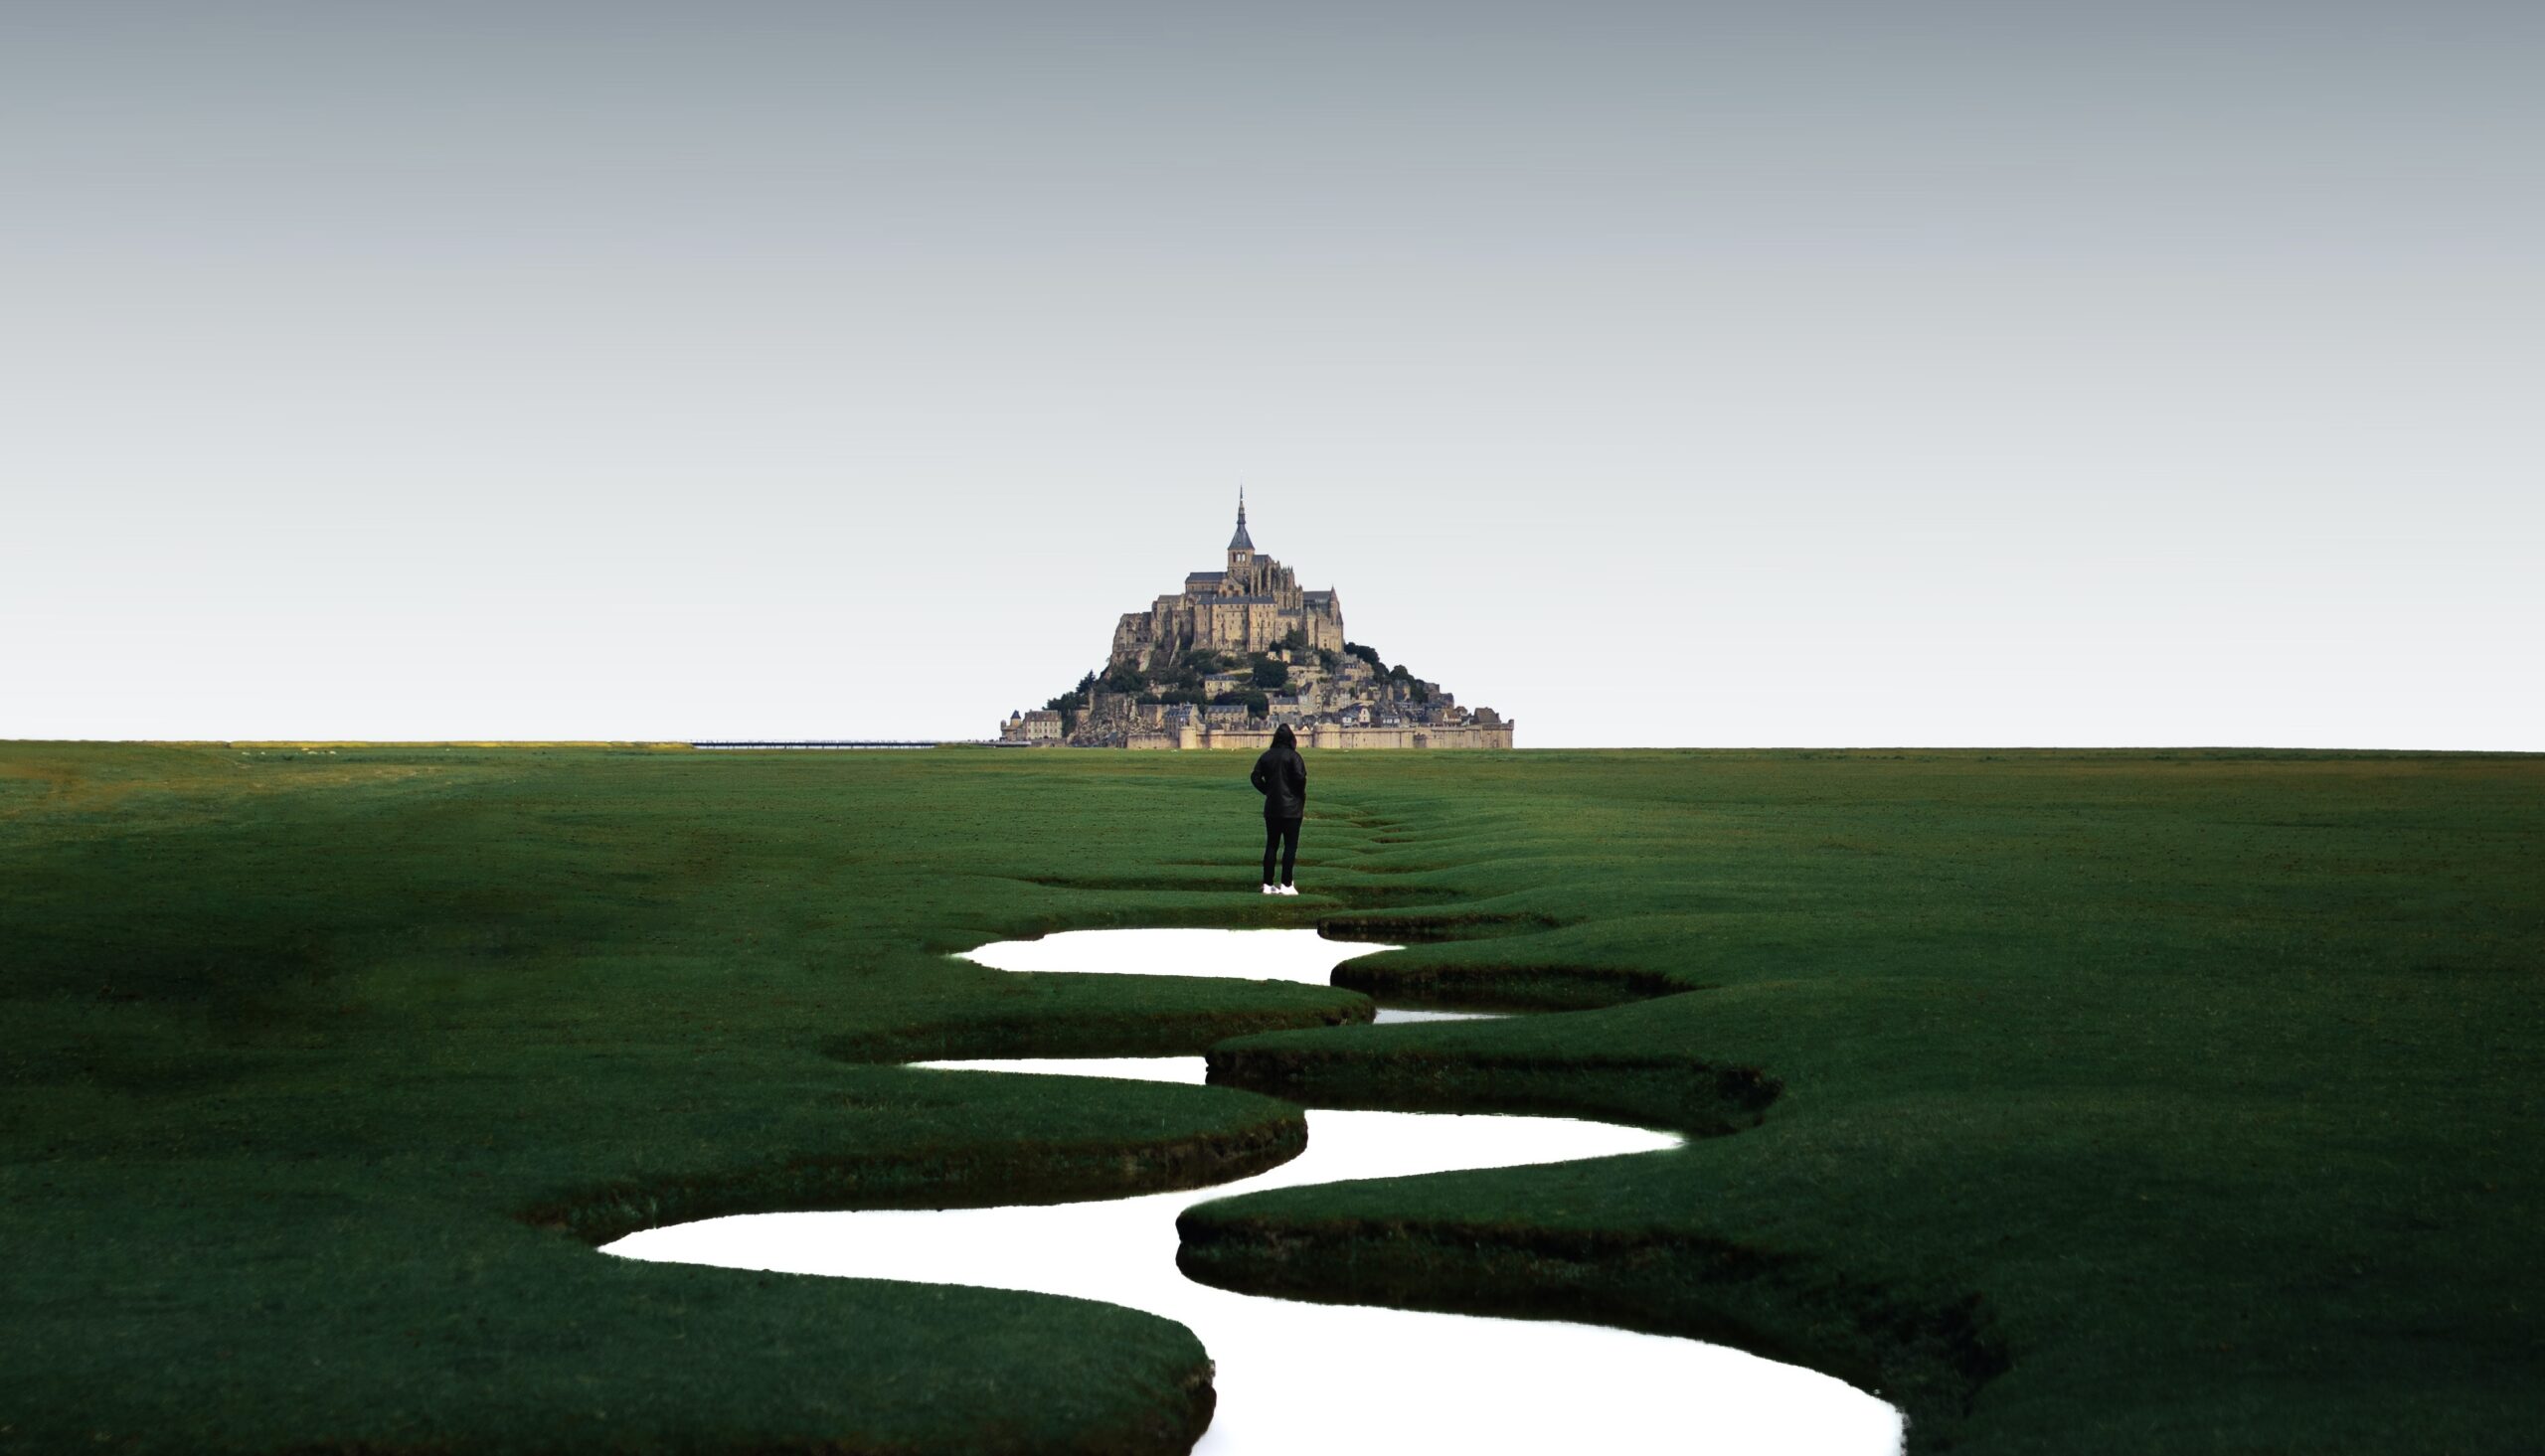 The islet Mont-Saint-Michel is a significant attraction in Normandy. 
Pictured: A long distance photo of the Mont-Saint-Michel from the mainland, with green grass for miles  